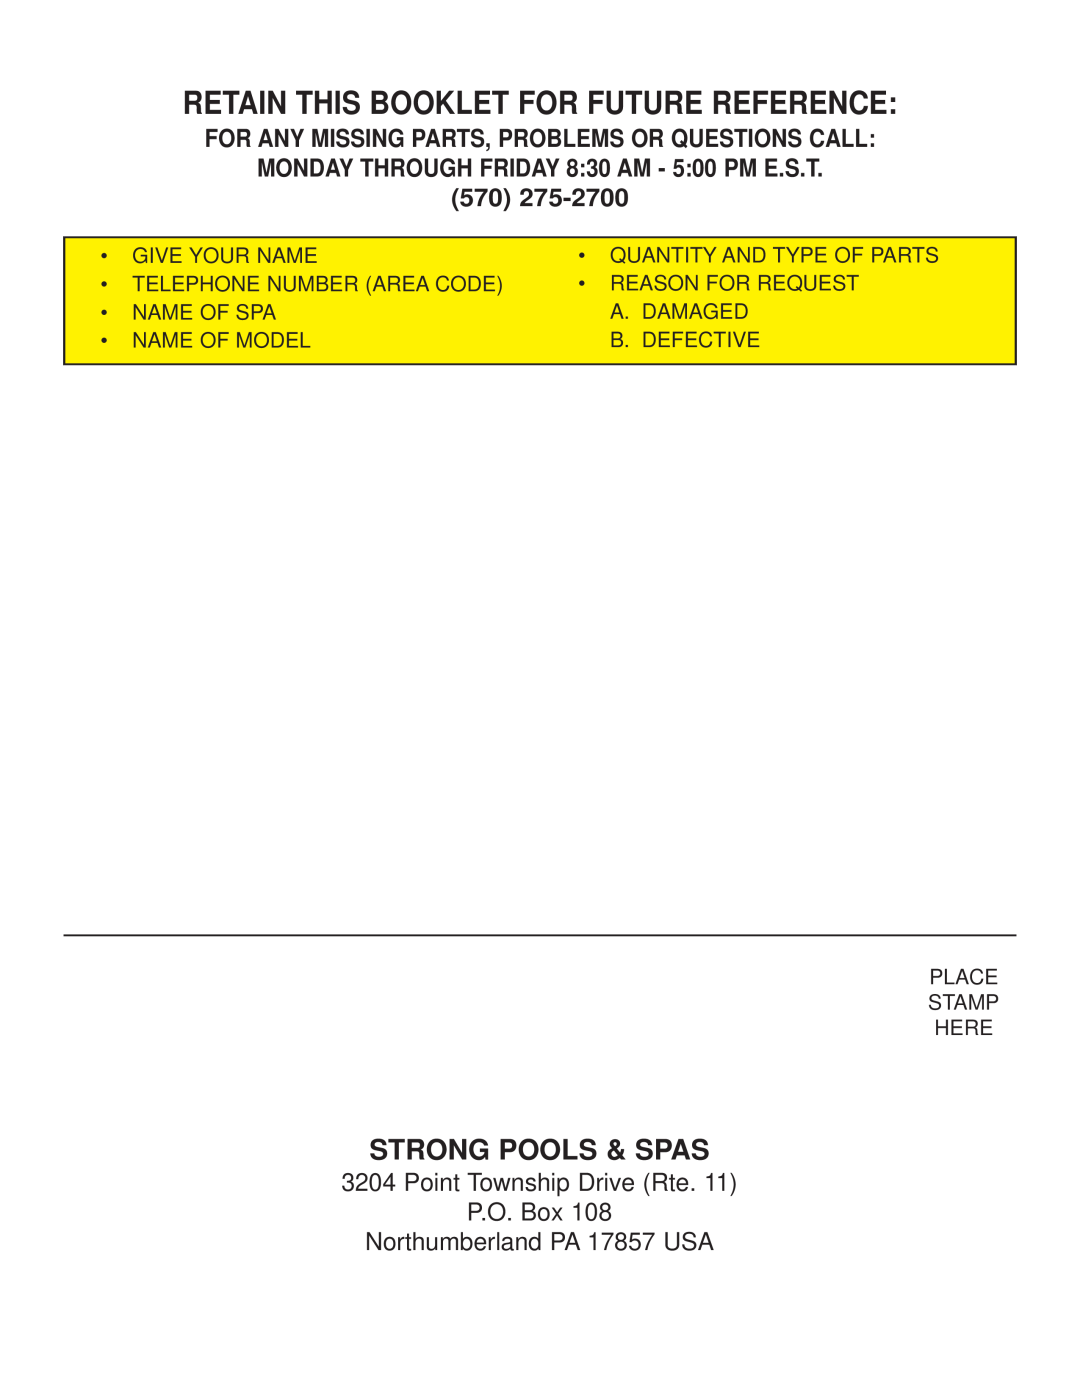 Strong Pools and Spas Patriot Spa Retain This Booklet For Future Reference, MONDAY THROUGH FRIDAY 8 30 AM - 5 00 PM E.S.T 